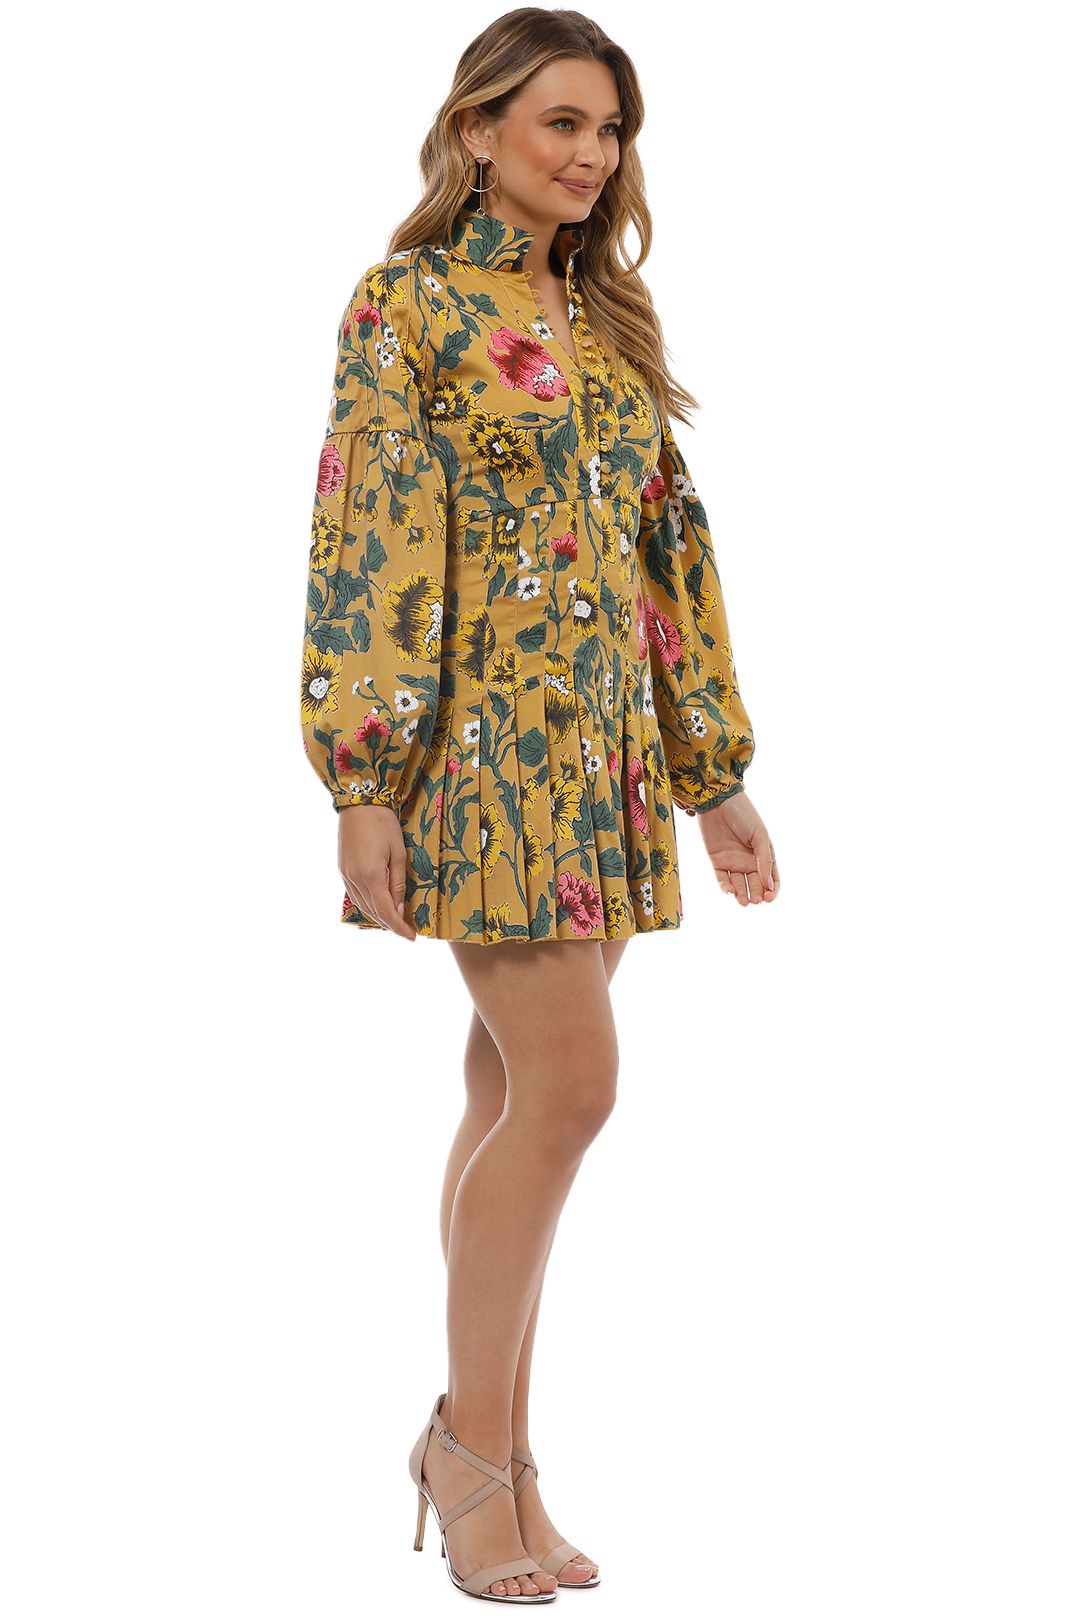 Cameo - Another Lover LS Dress - Side